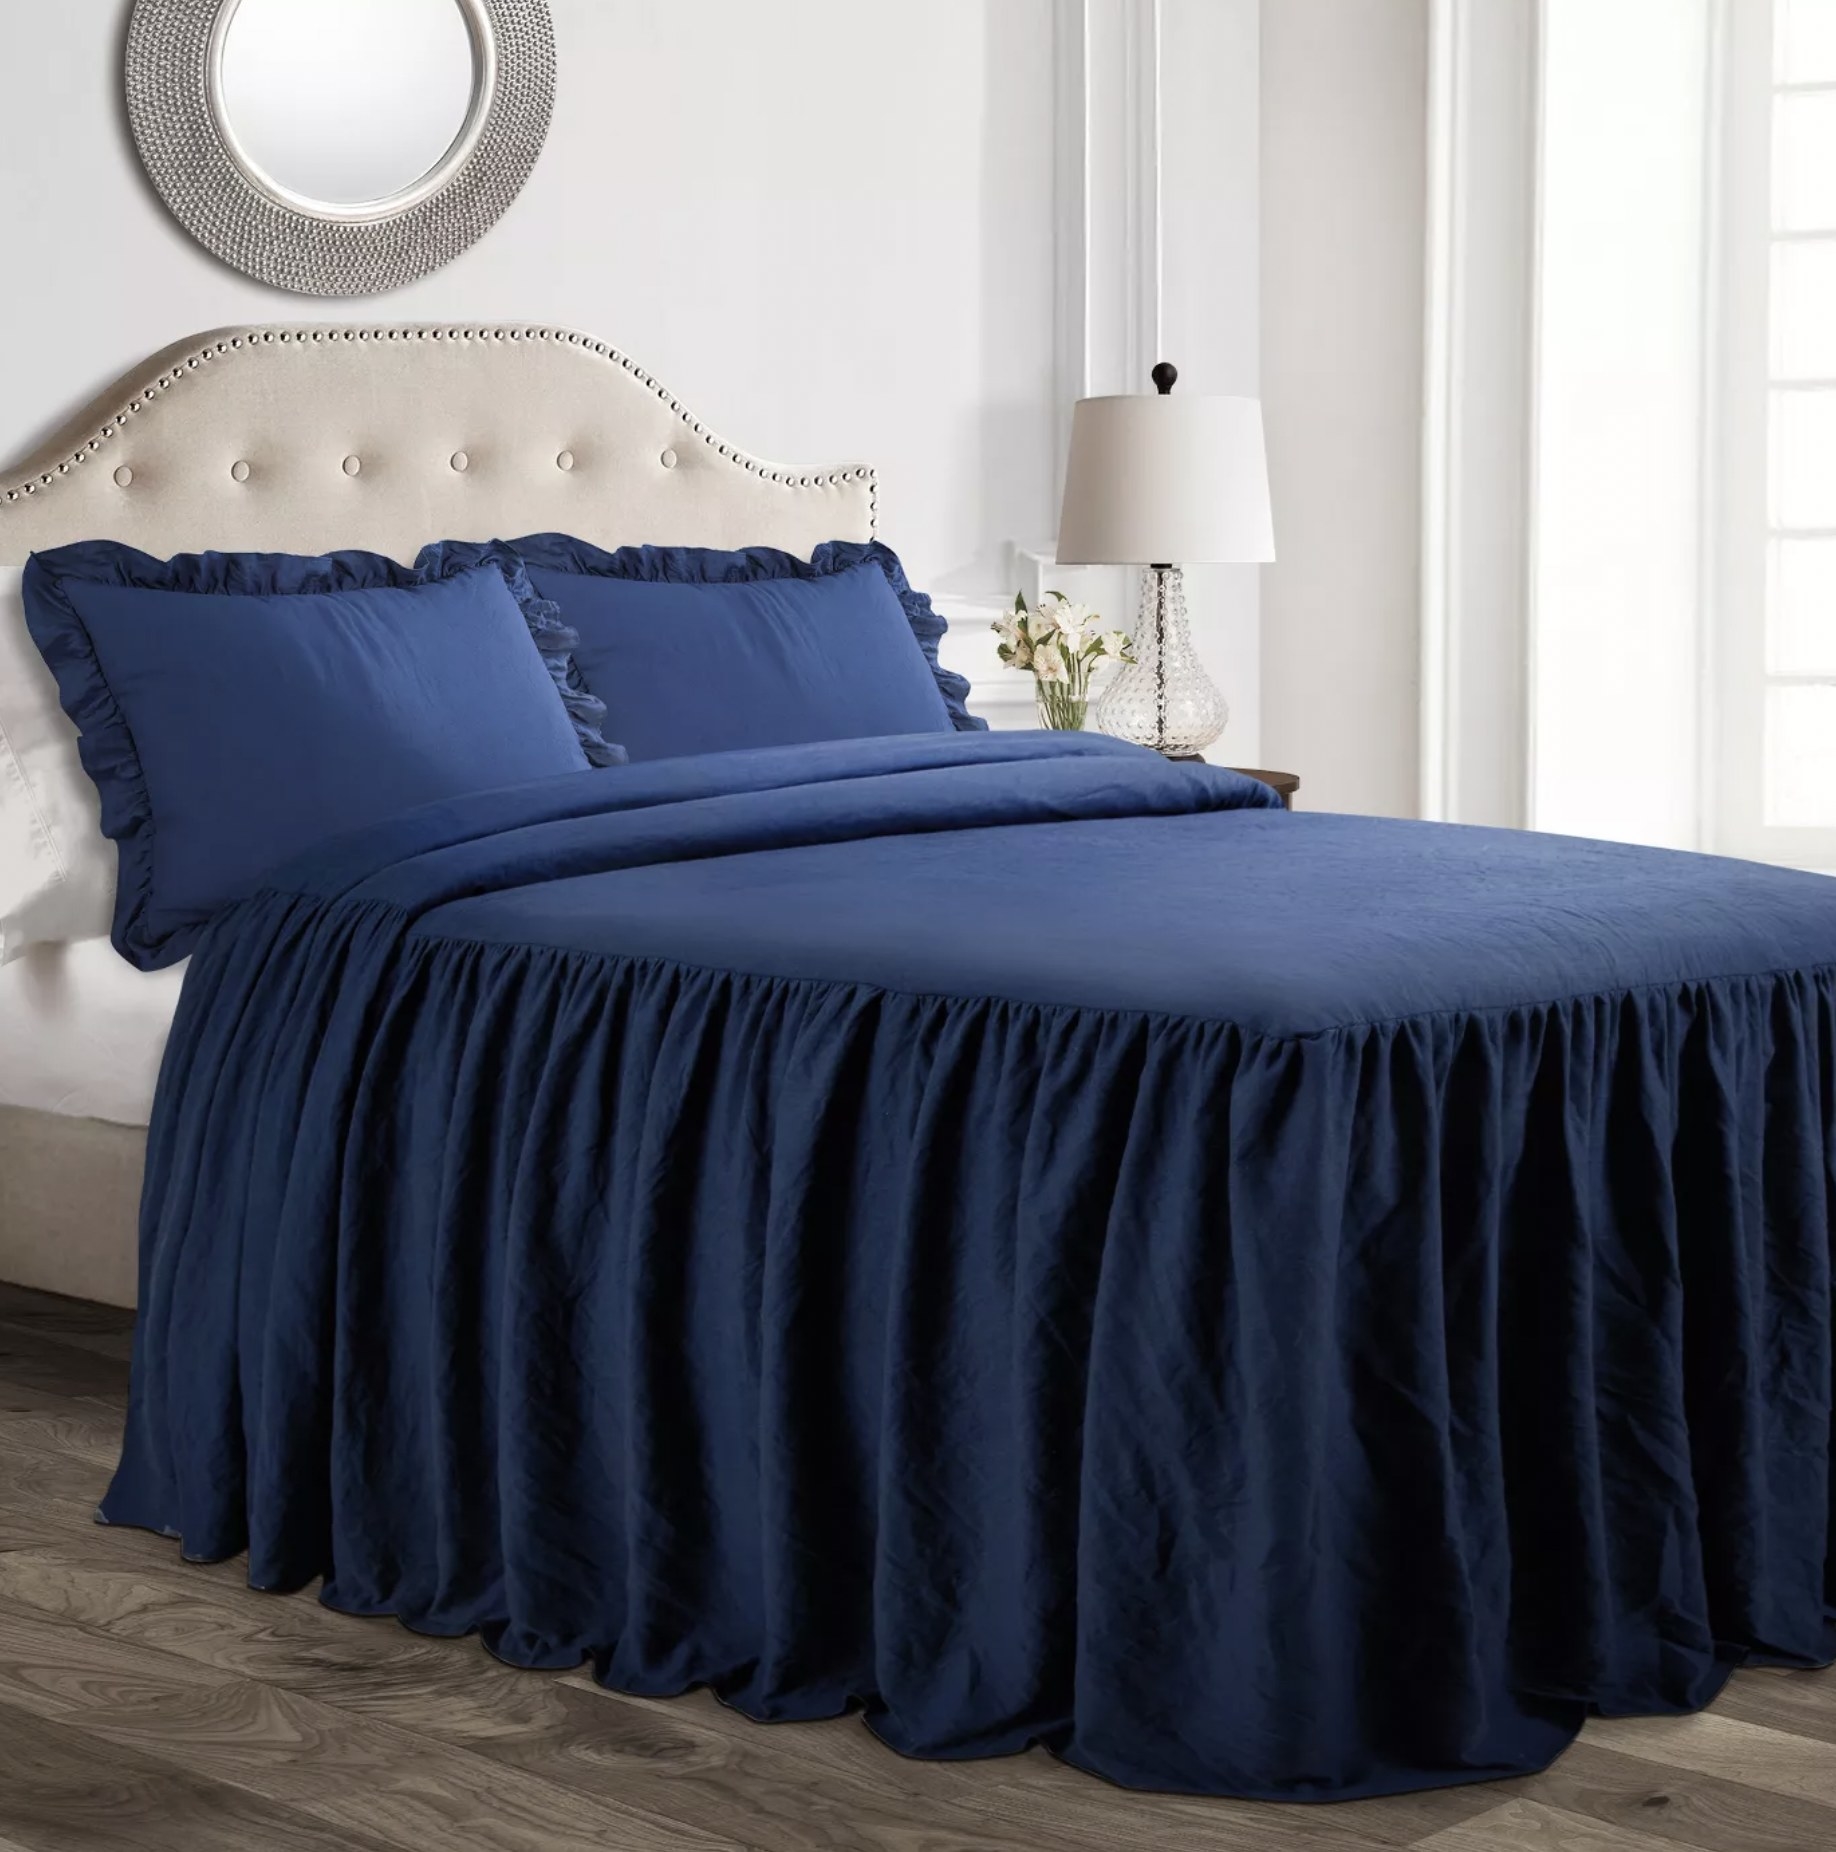 The navy blue ruffle bed skirt